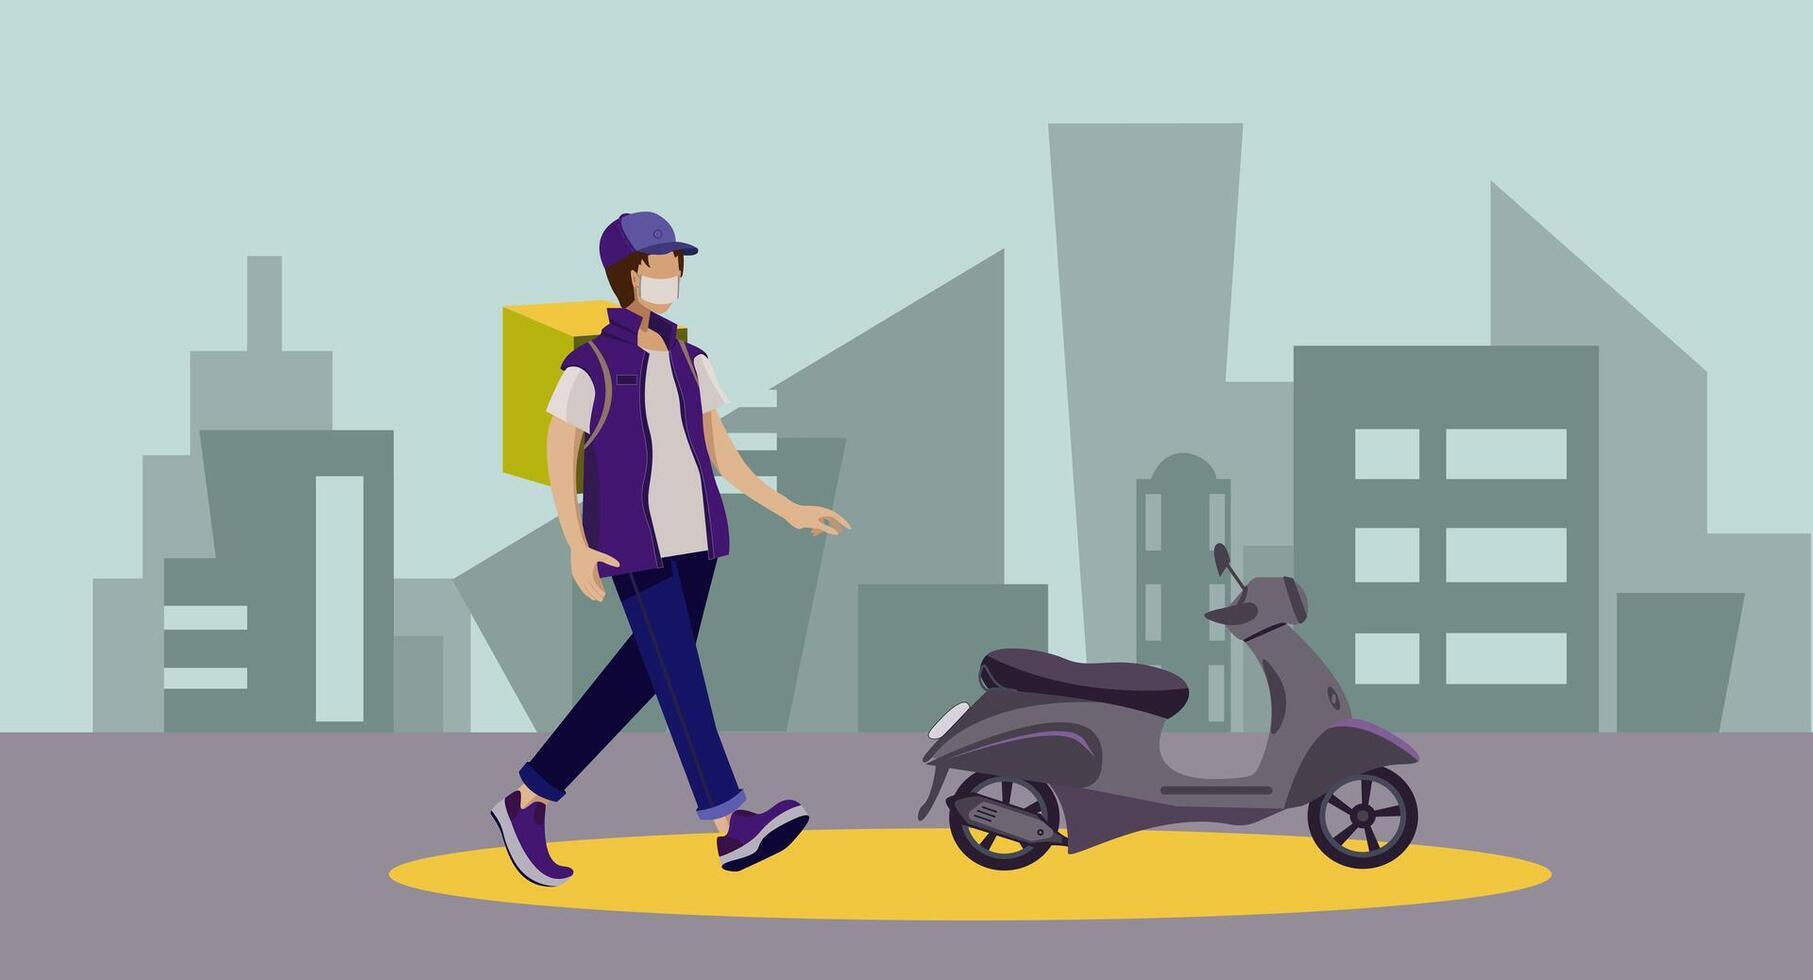 Food delivery. Express courier delivery. Delivery scooter guy. Vector illustration on the theme of delivery. Stock illustration in a cardboard style